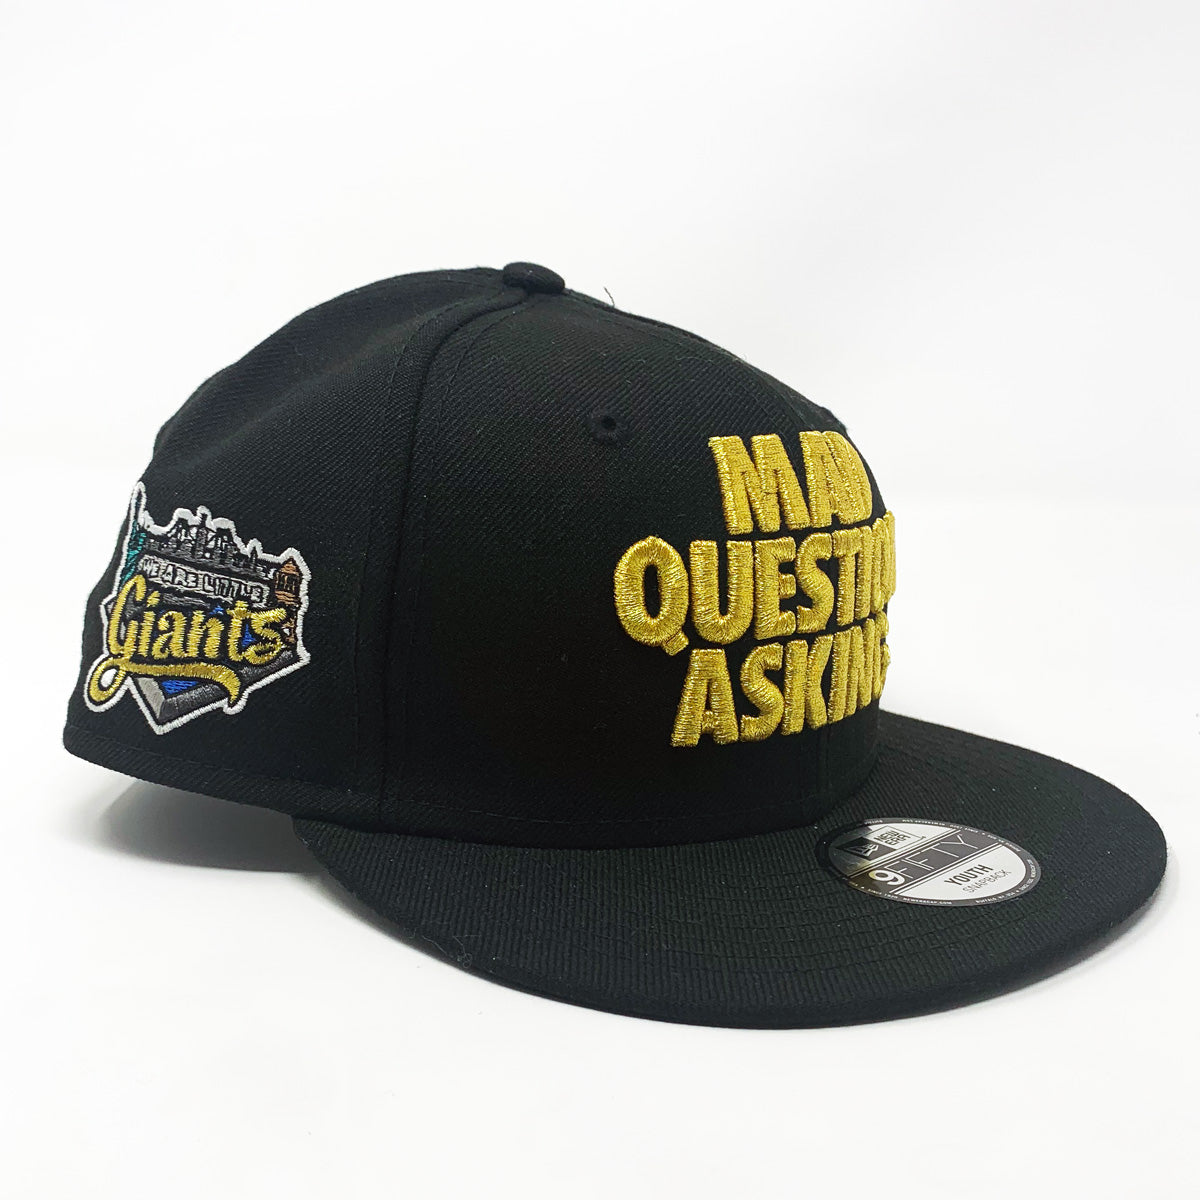 Mad Question Asking Hat (Black/Gold)